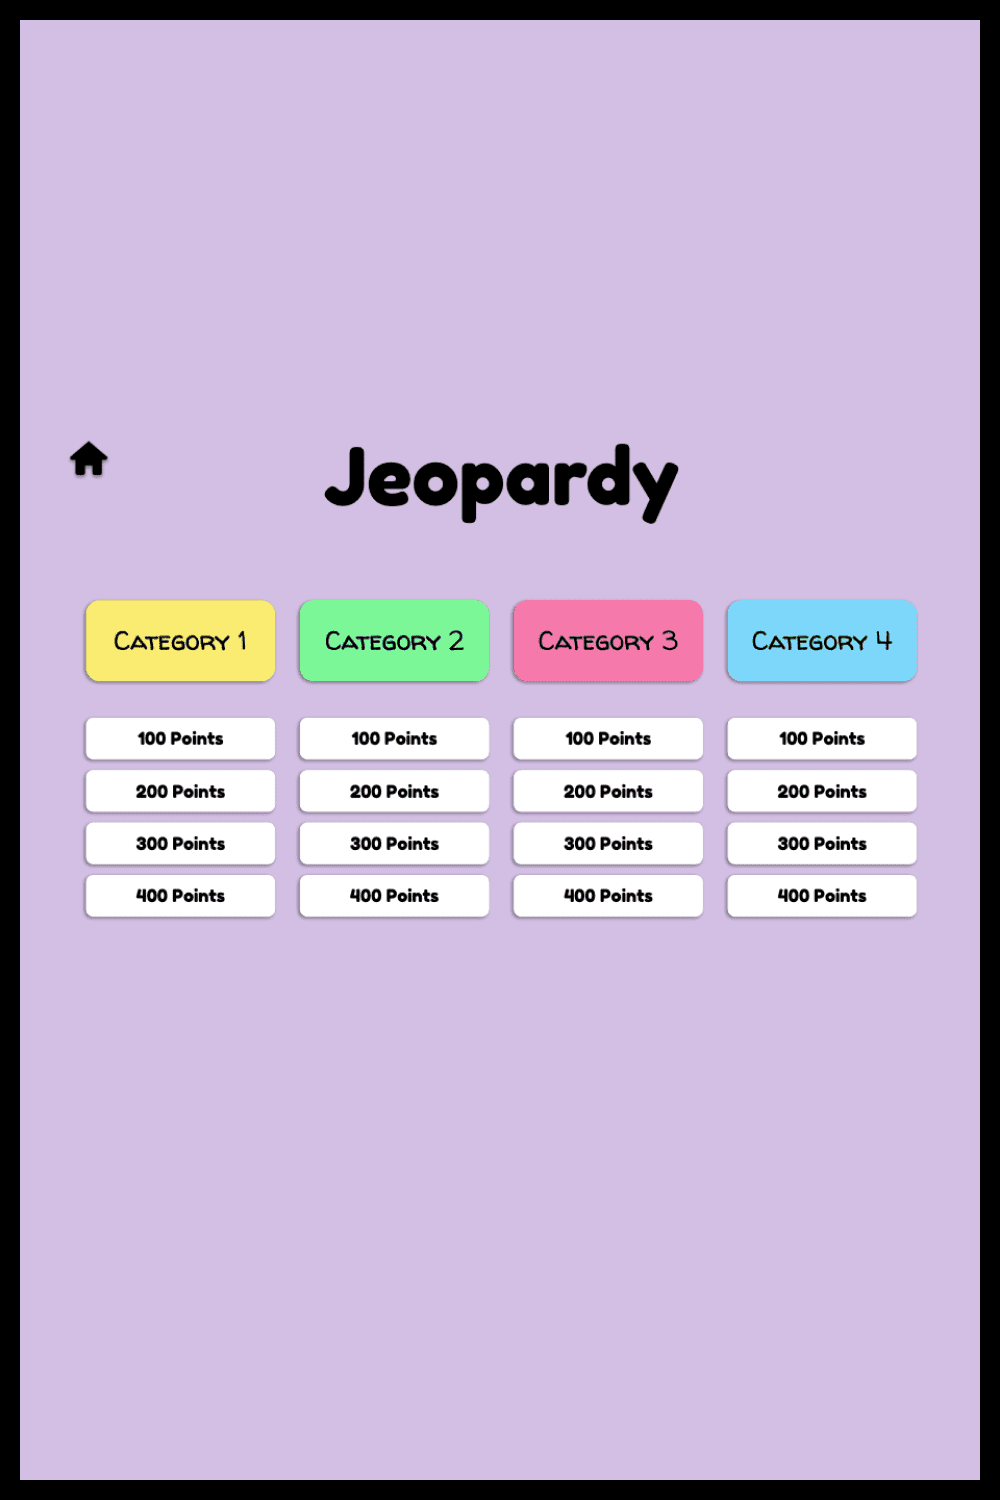 Table for playing Jeopardy with white cells and pink background.